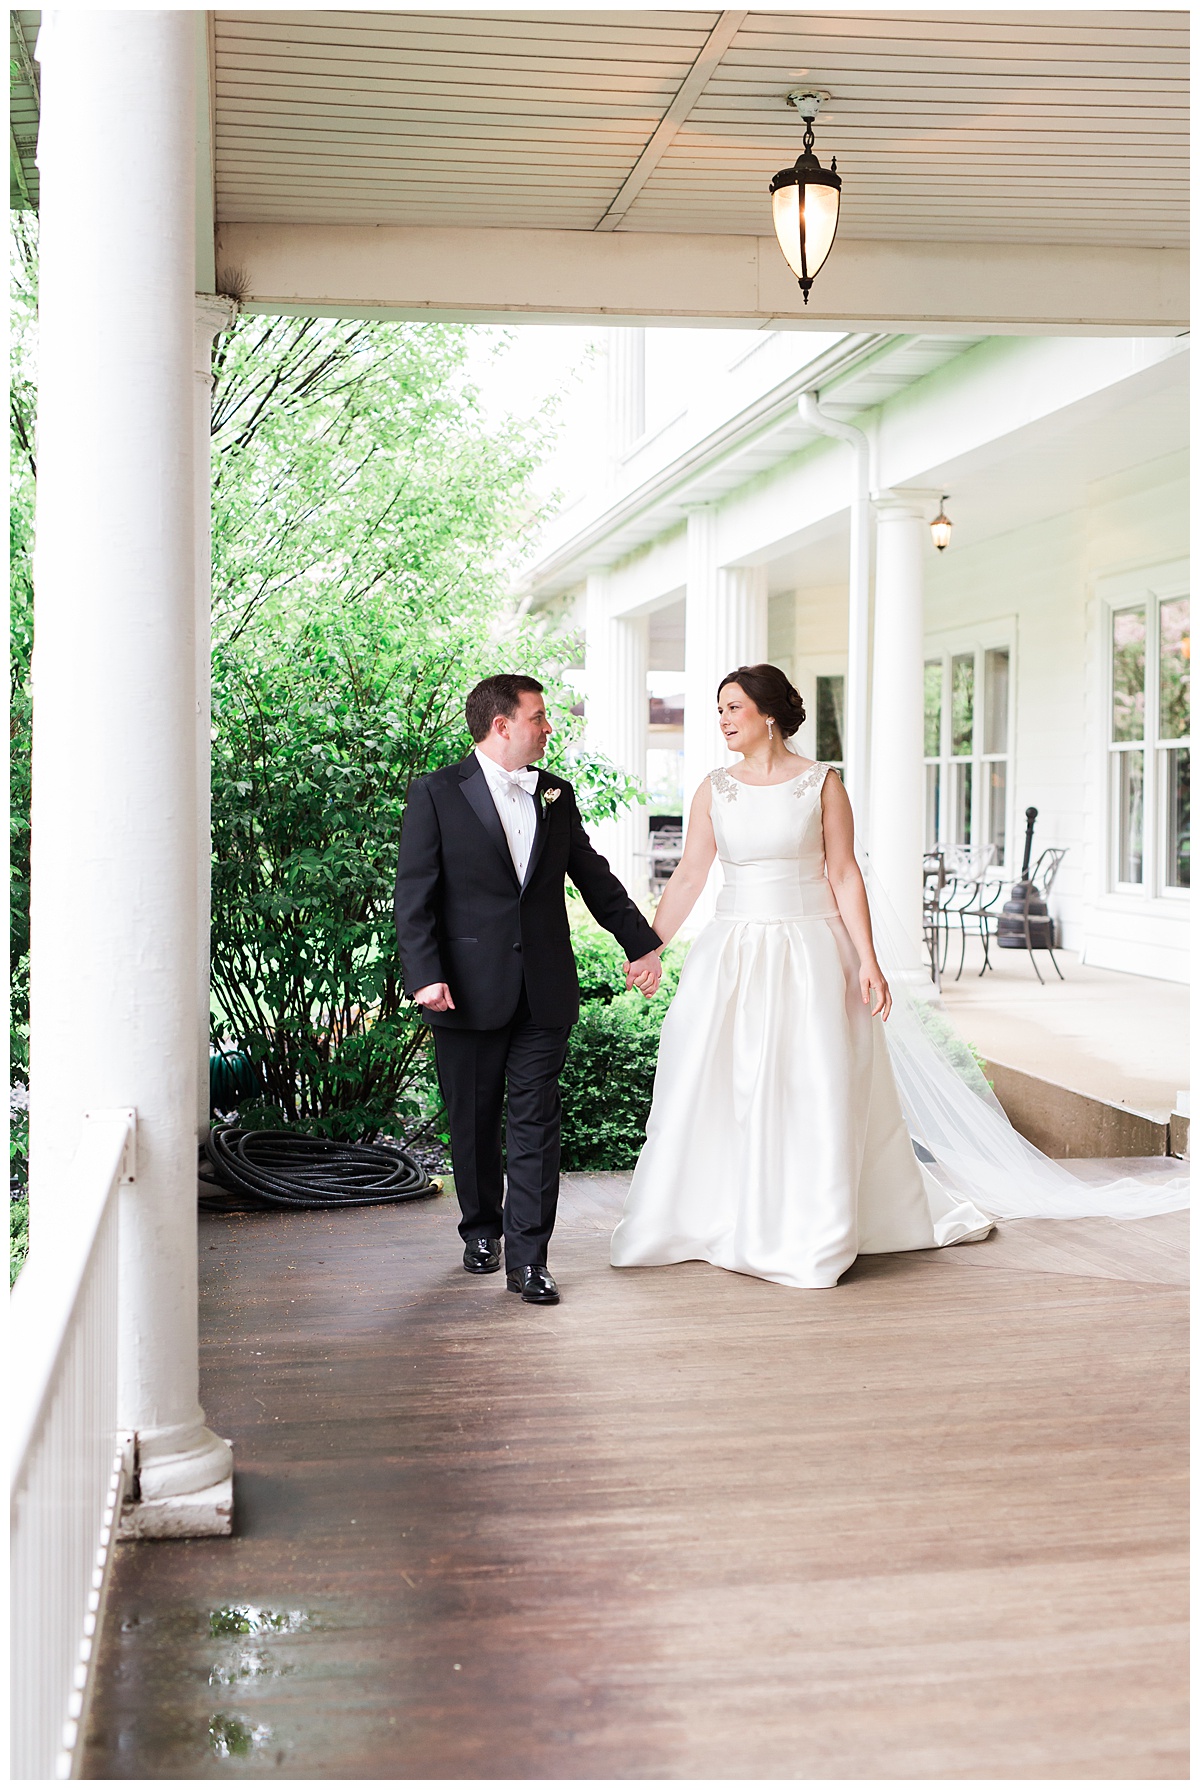 The Best Wedding Venues in the Quad Cities | Quad Cities Weddings